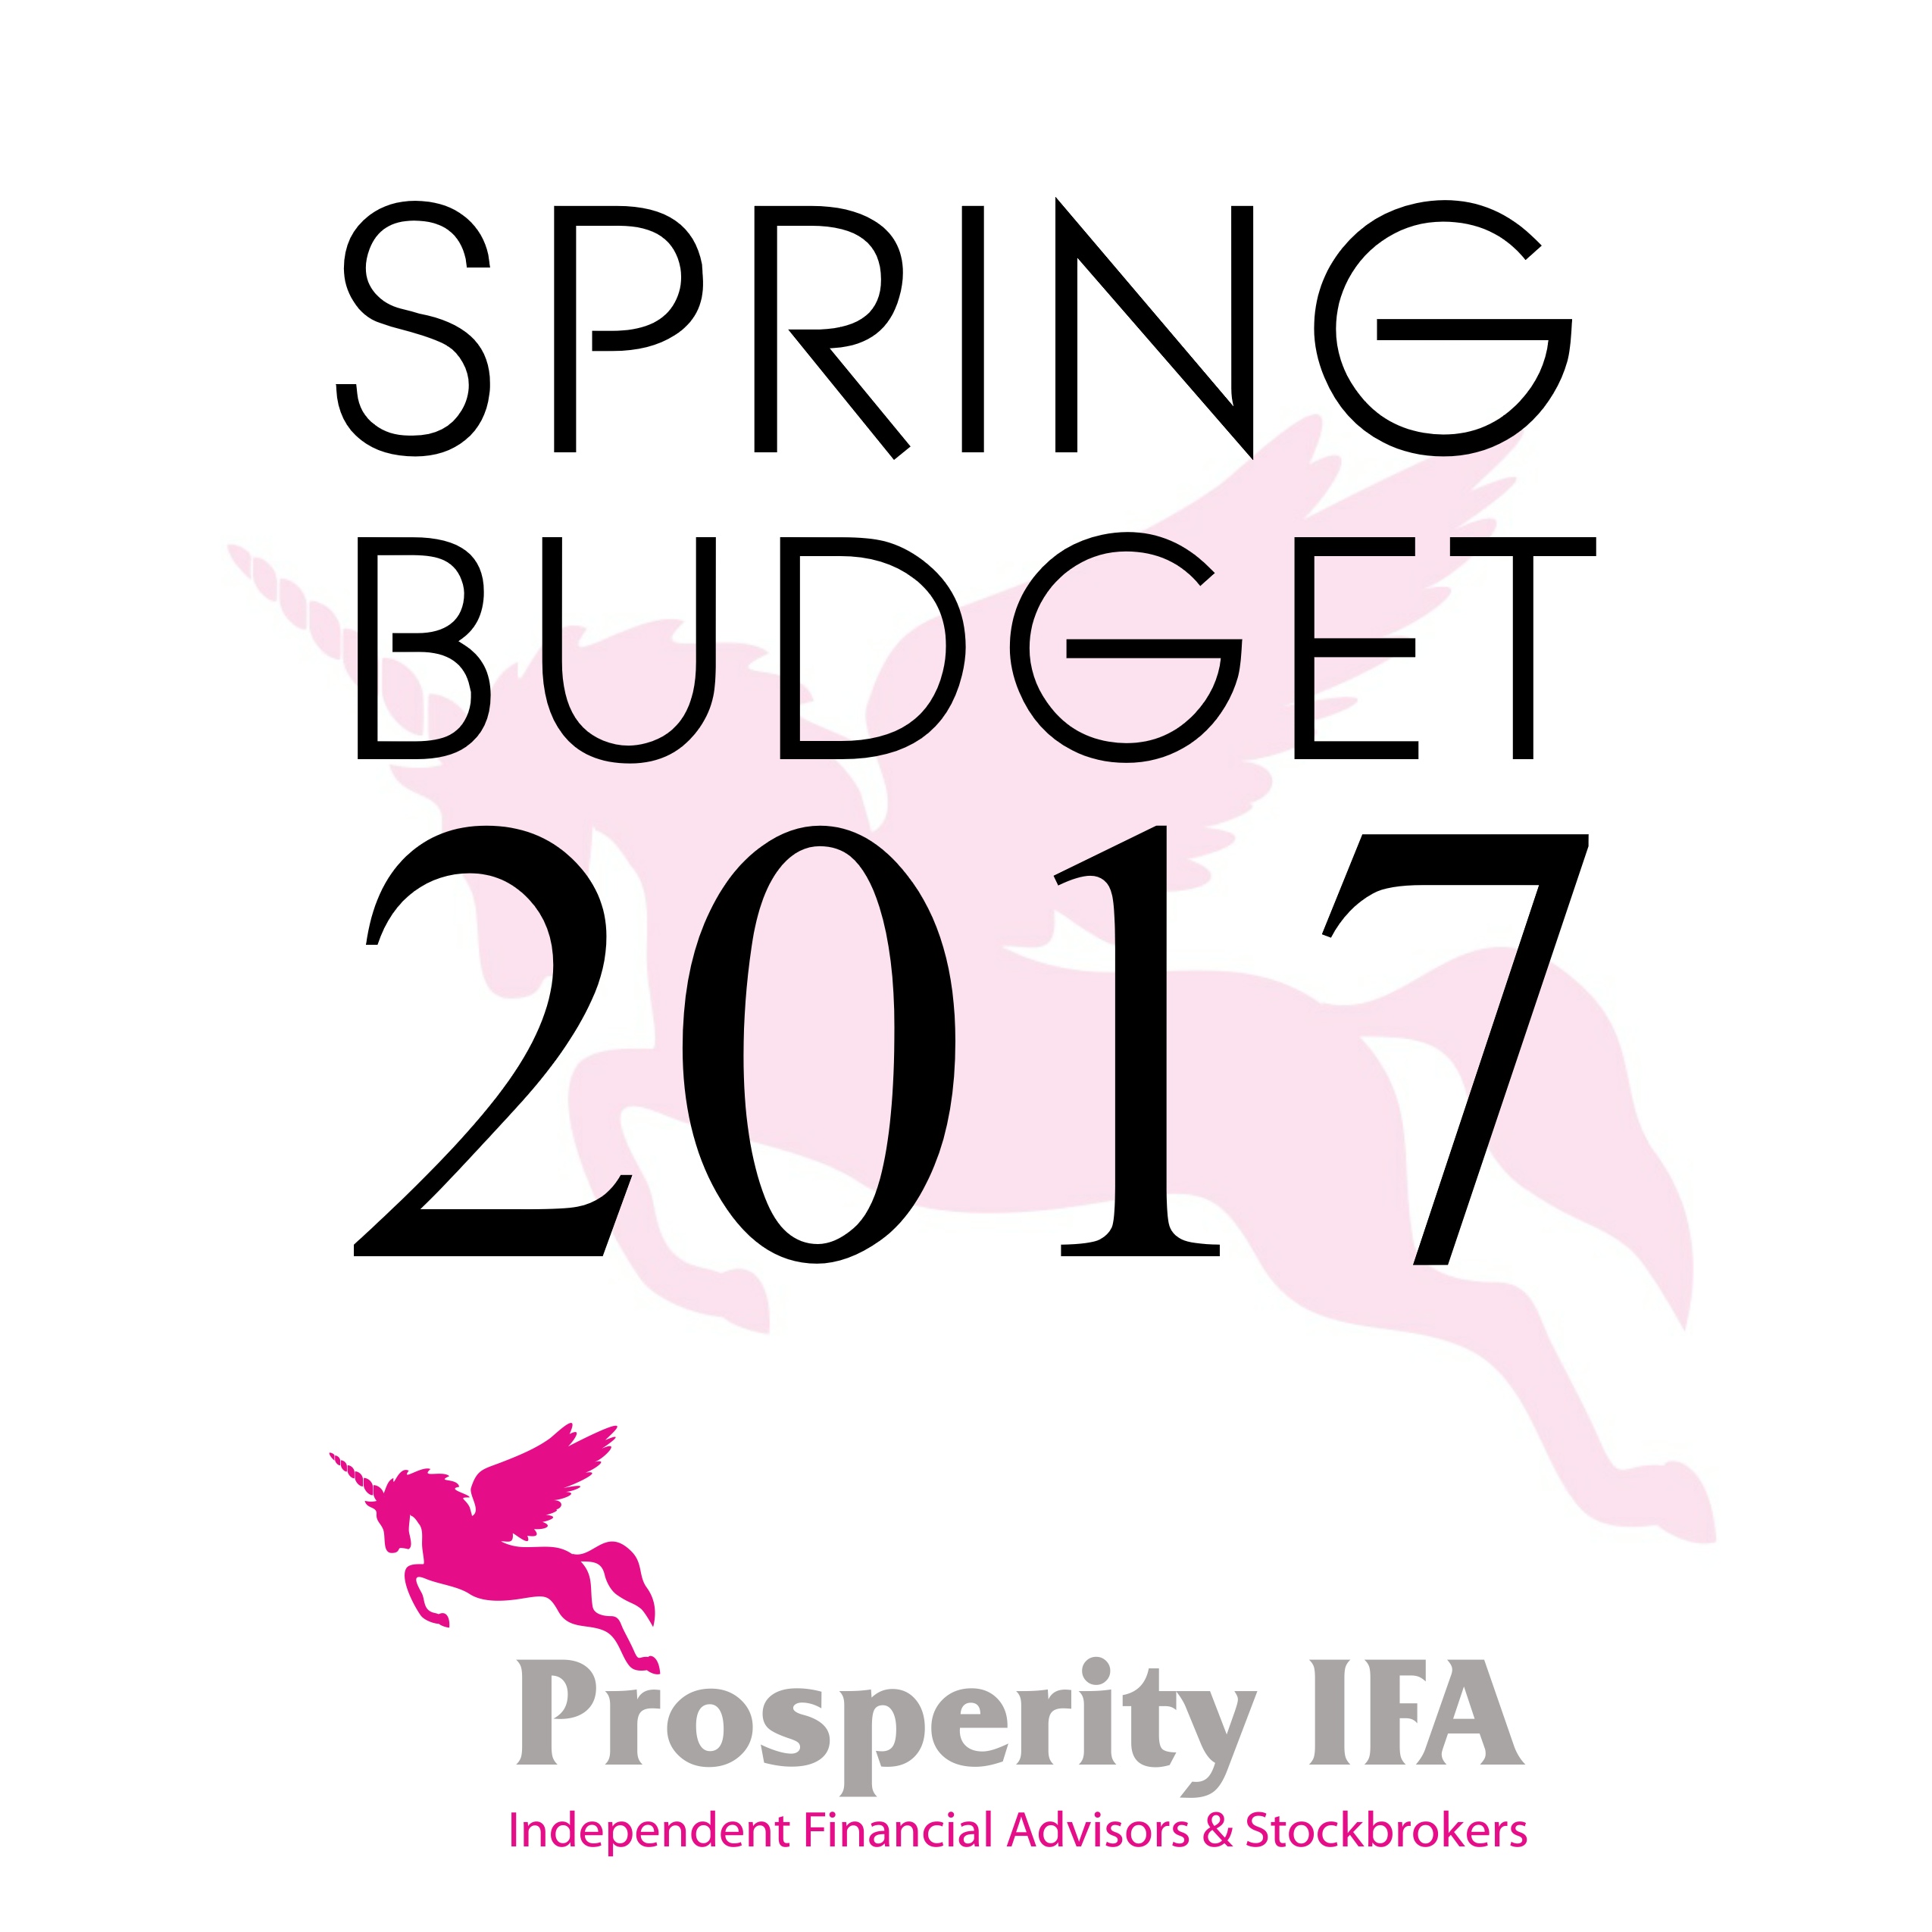 Our summary of the Budget 2017